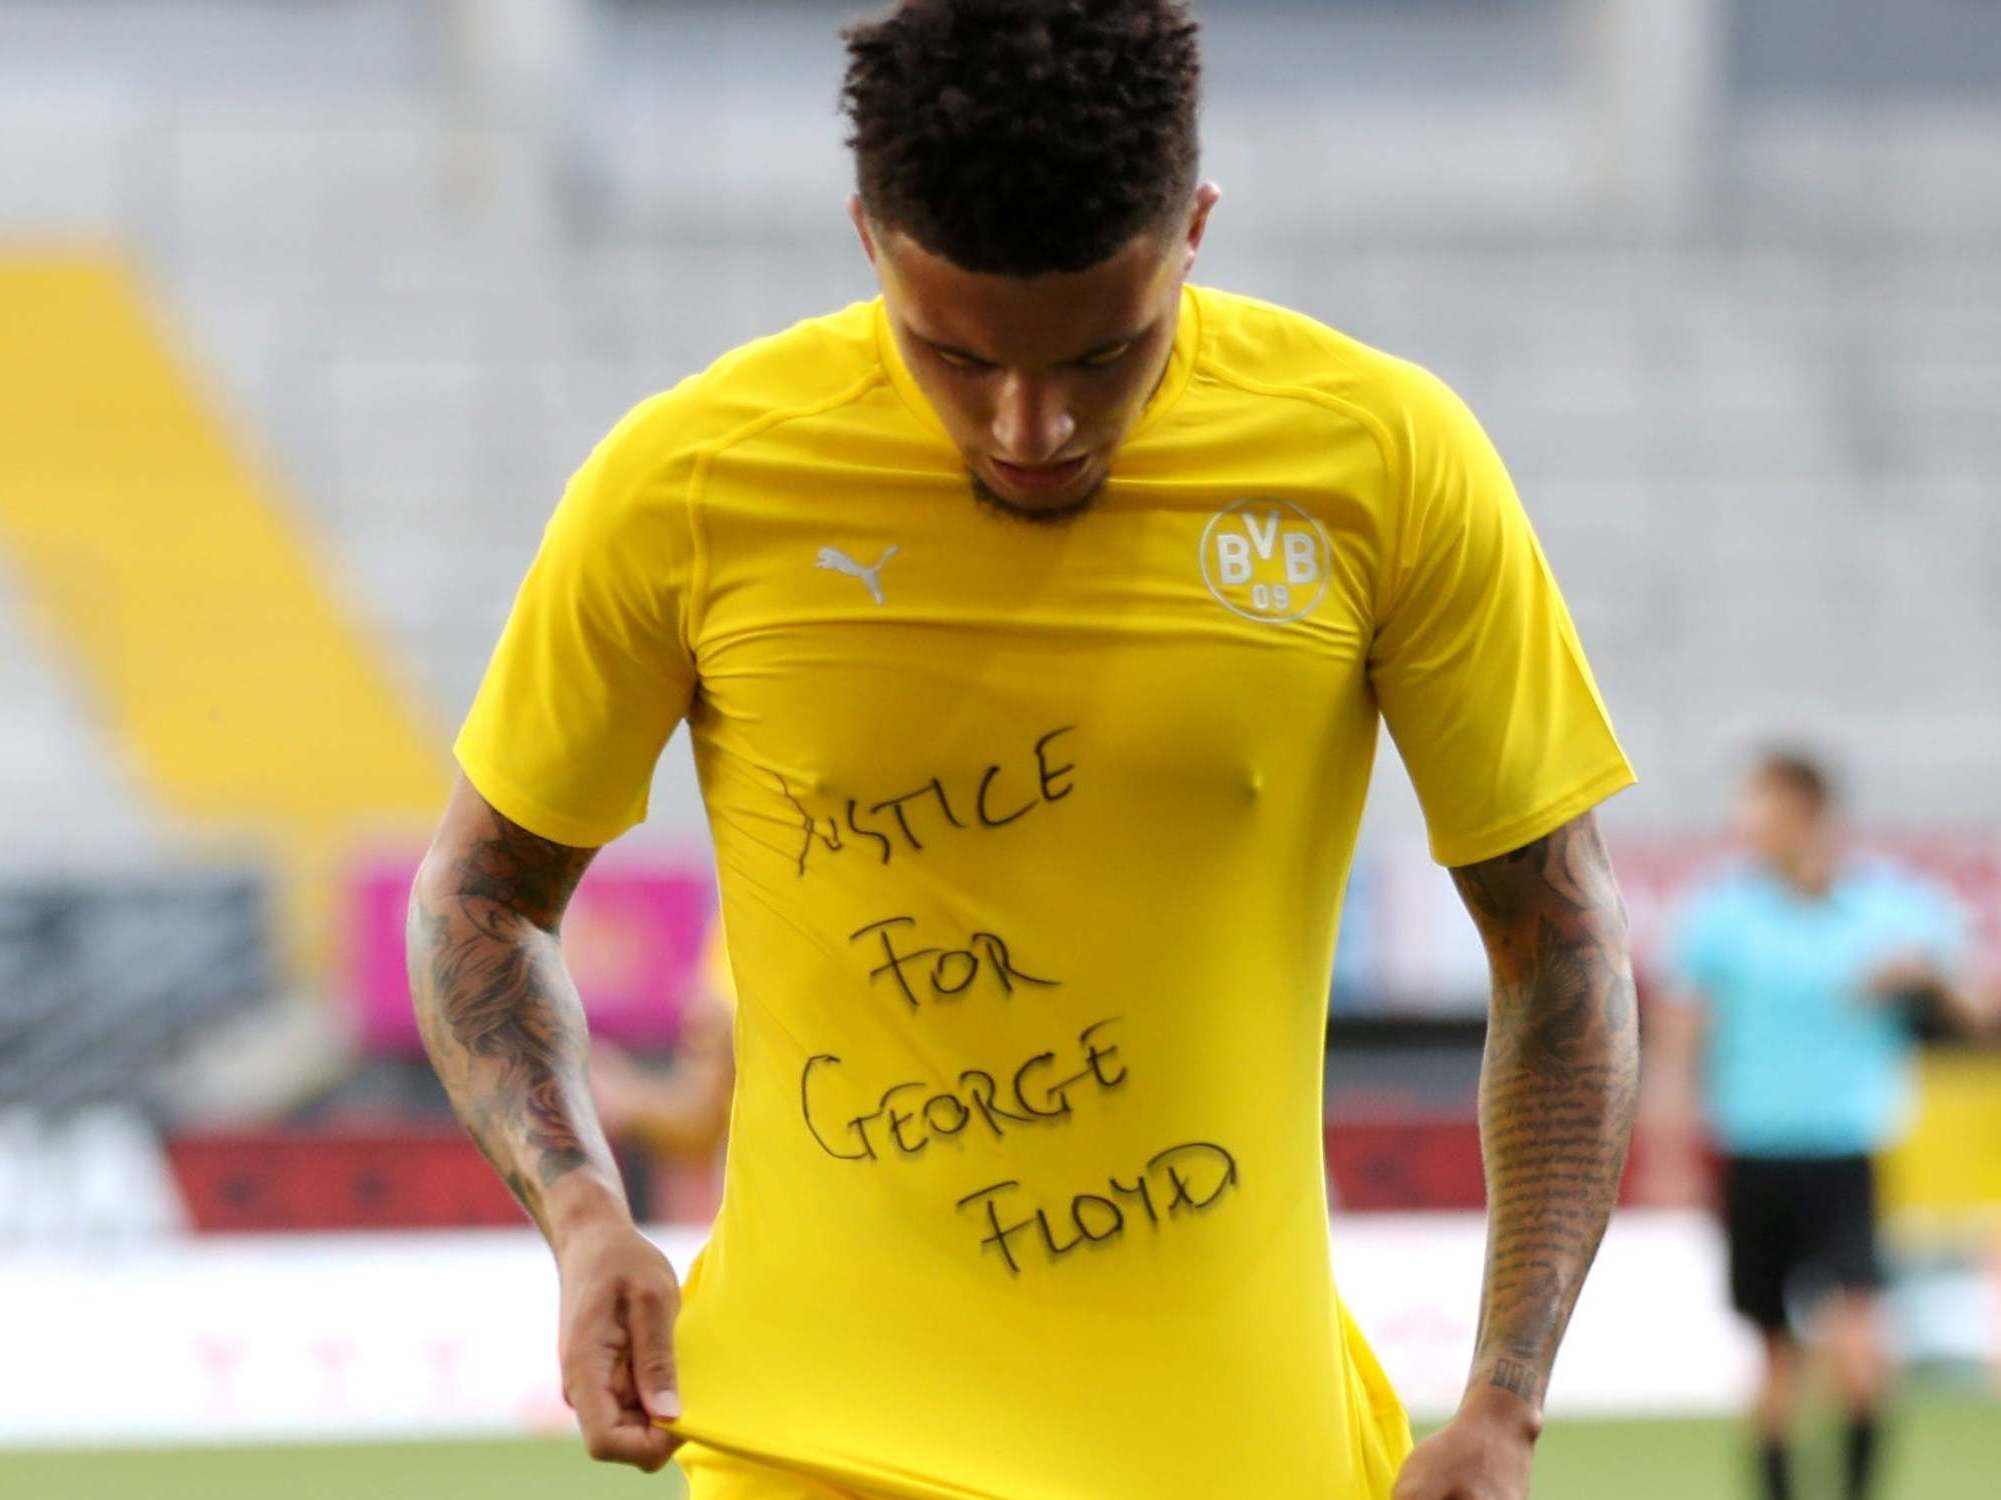 Jadon Sancho celebrates scoring by revealing a ‘Justice for George Floyd’ message